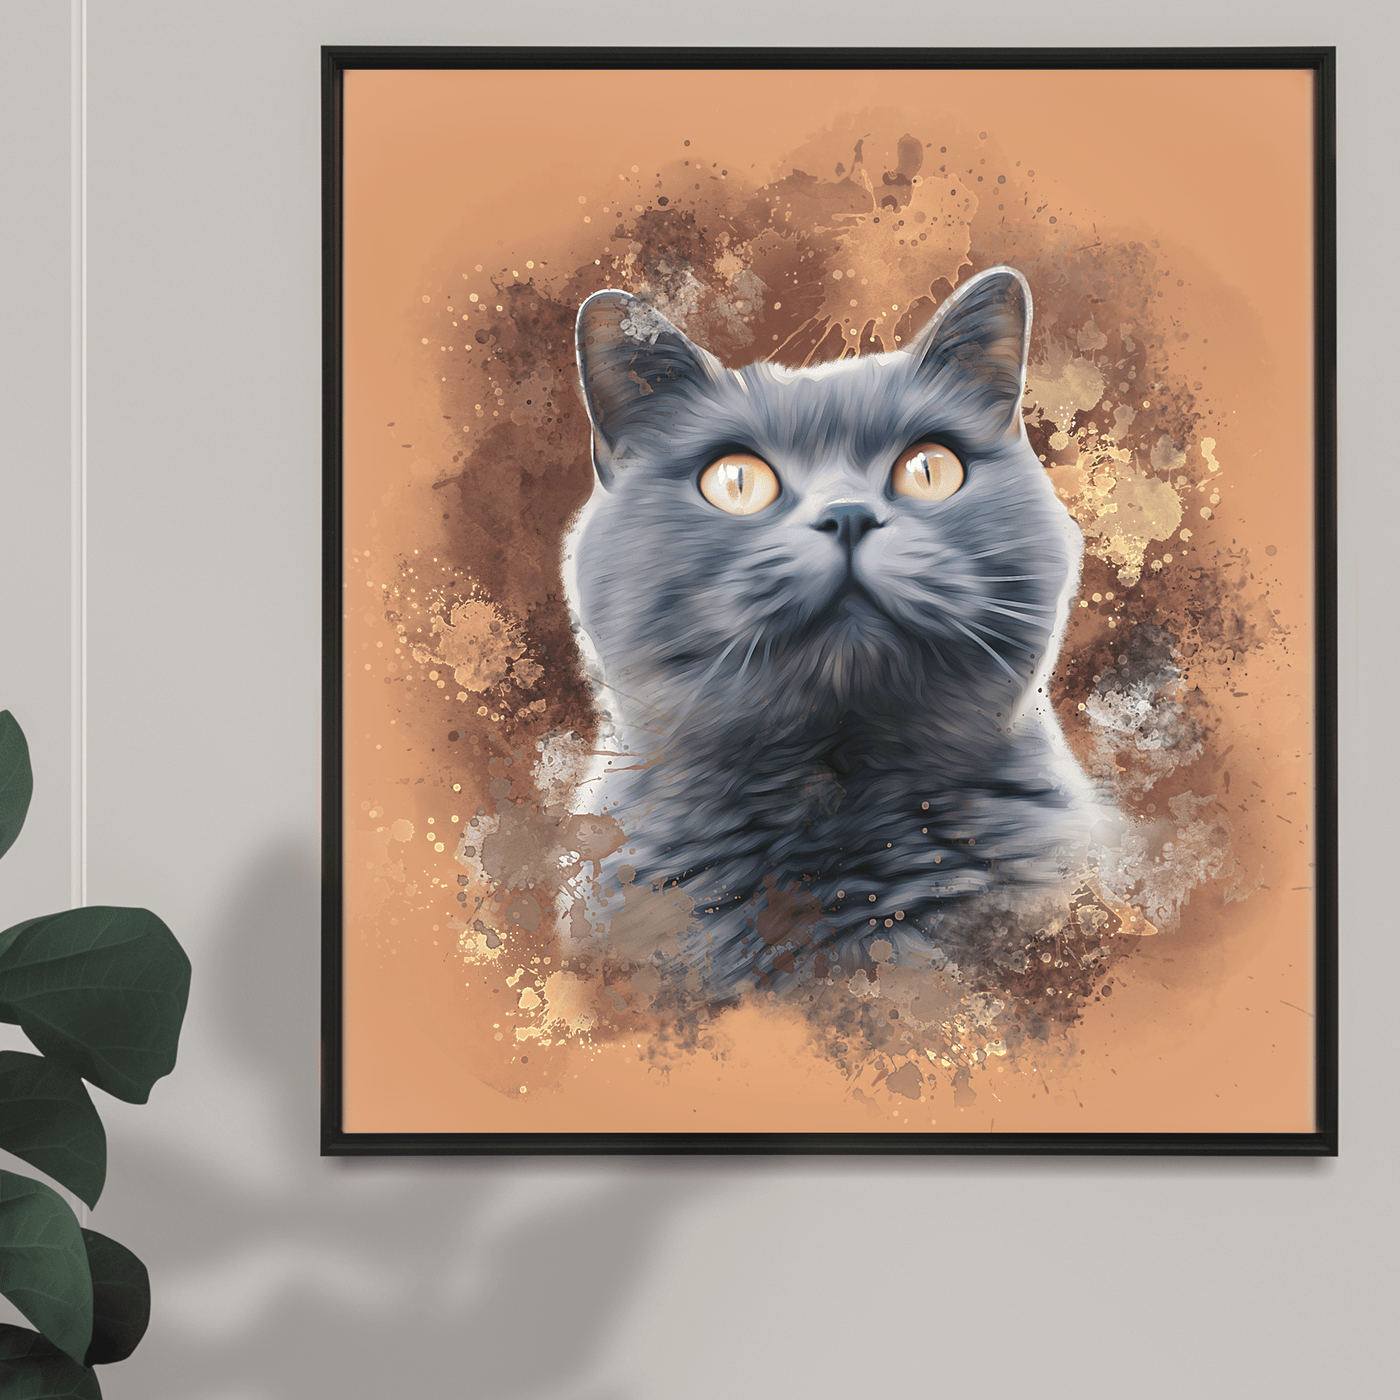 watercolor pet painting of a black fur cat with orange eyes